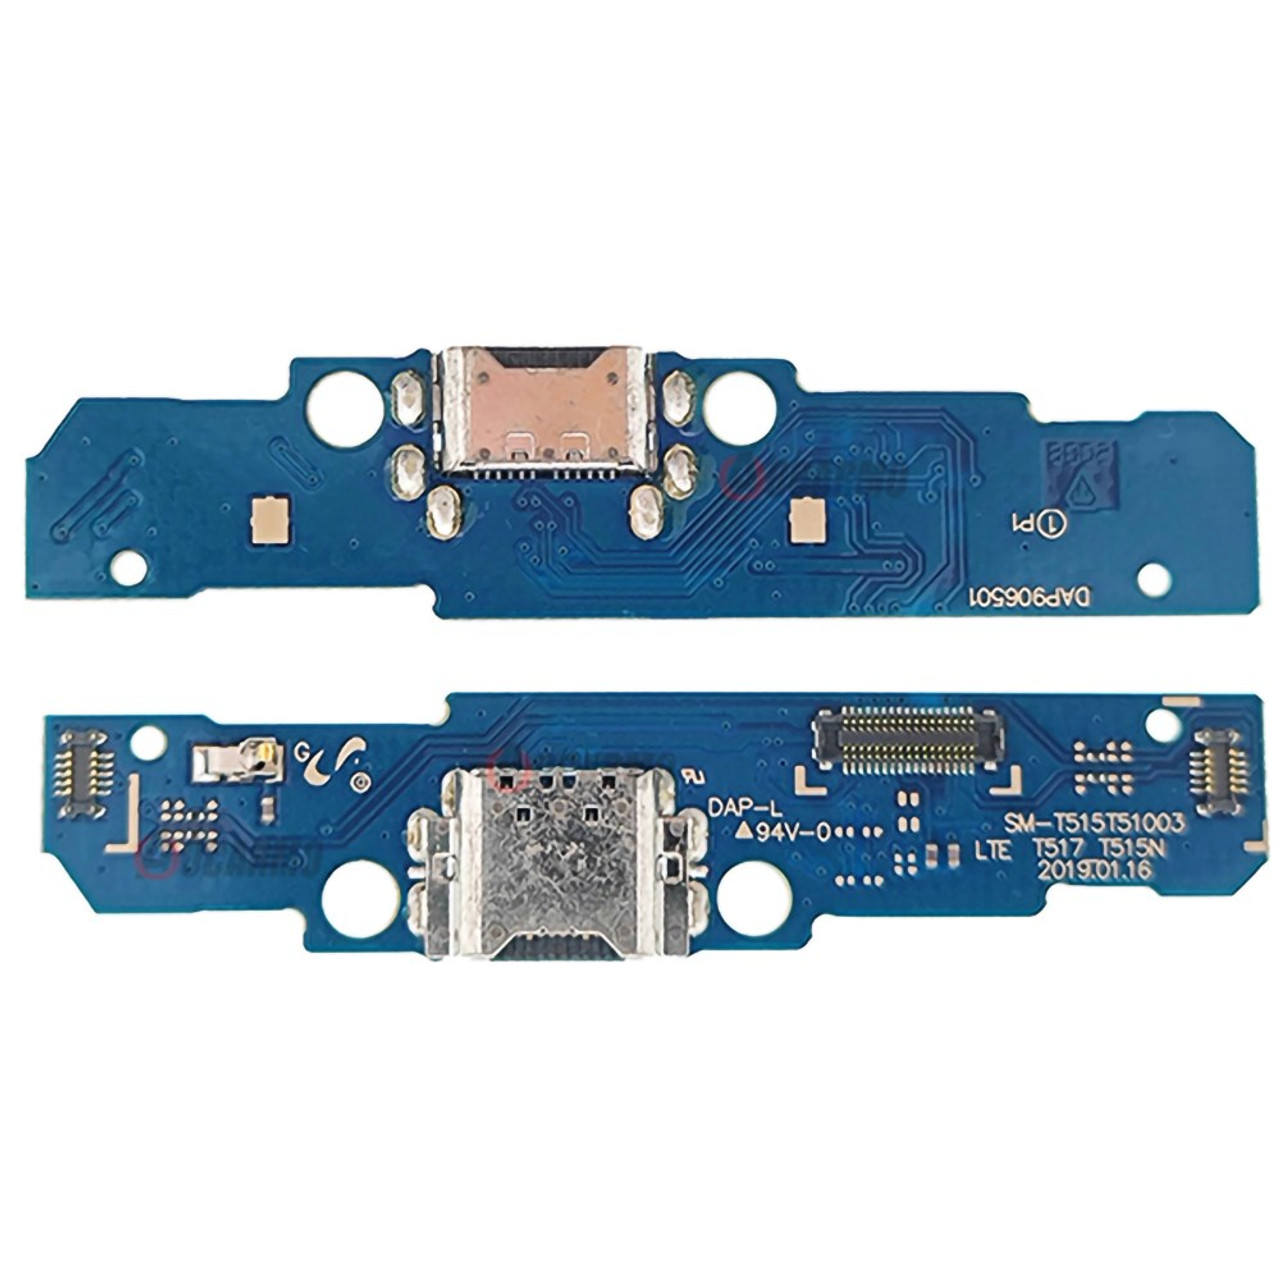 For Samsung Galaxy Tab A 10.1 (2019) SM-T510 (Wi-Fi) / SM-T515 (LTE) Dock  Connector Charging Port Flex Cable Replacement (without Logo) - Snatcher